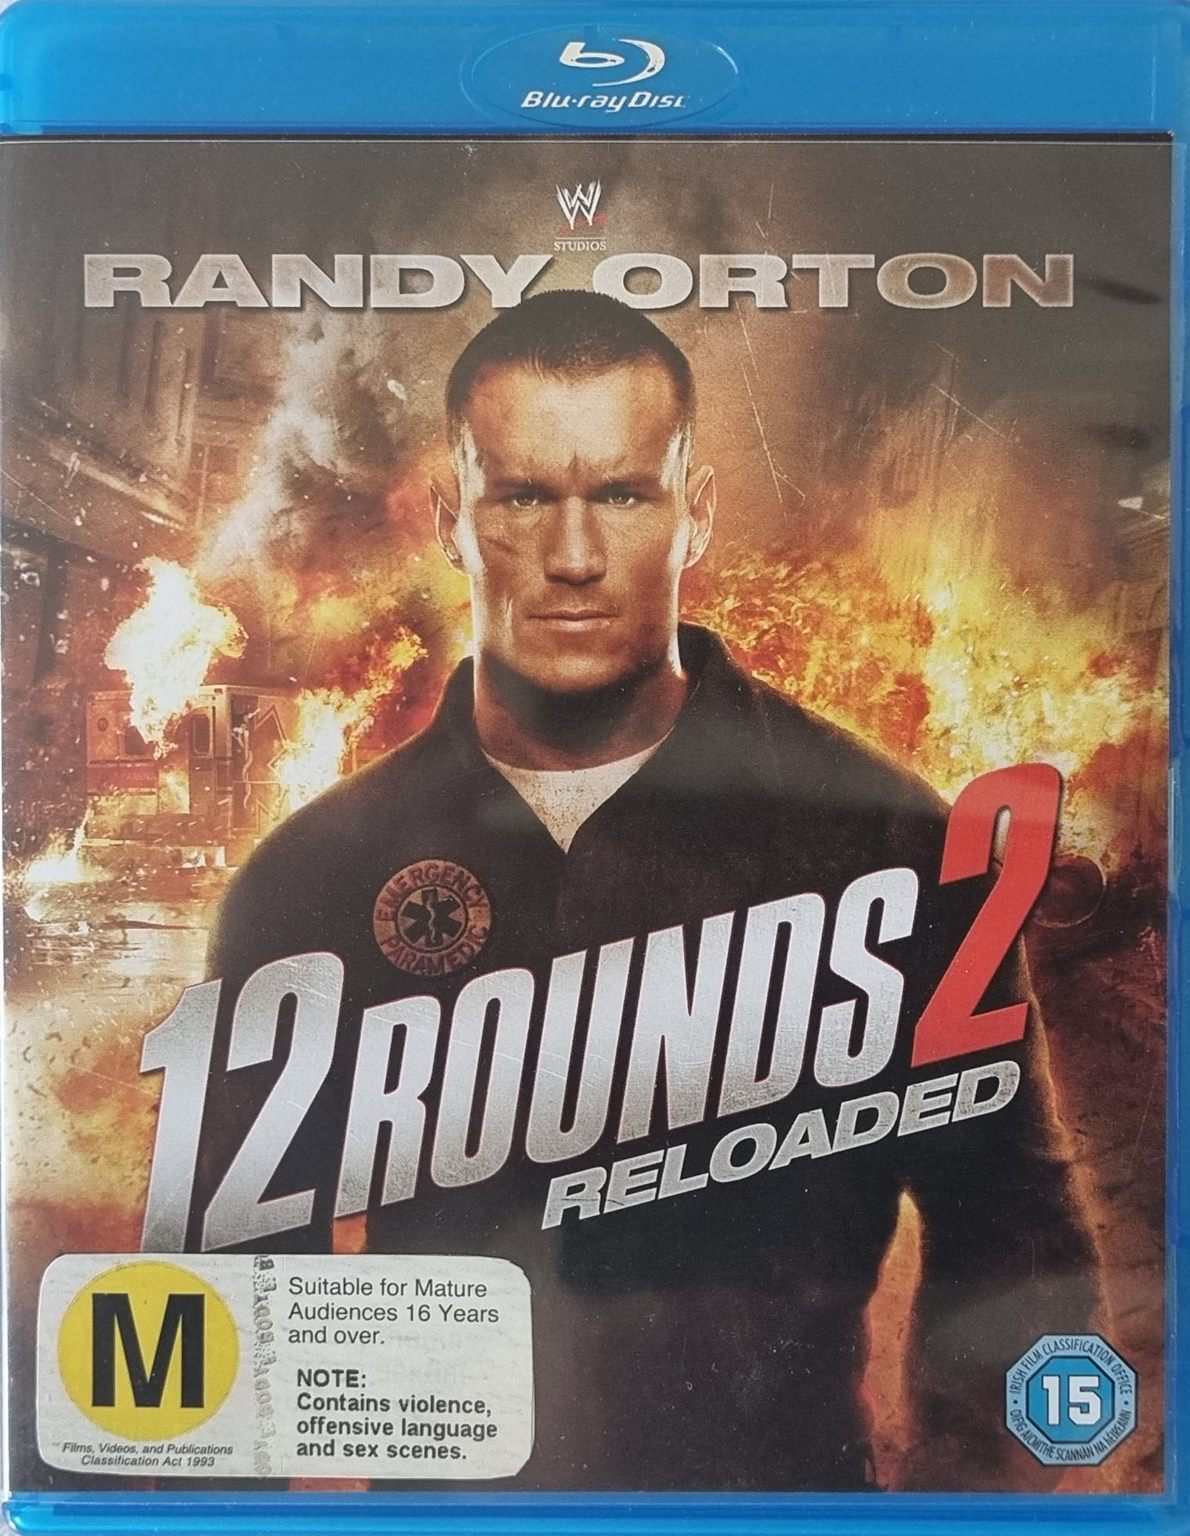 12 Rounds 2: Reloaded (Blu Ray) - Vinyl Kitchen